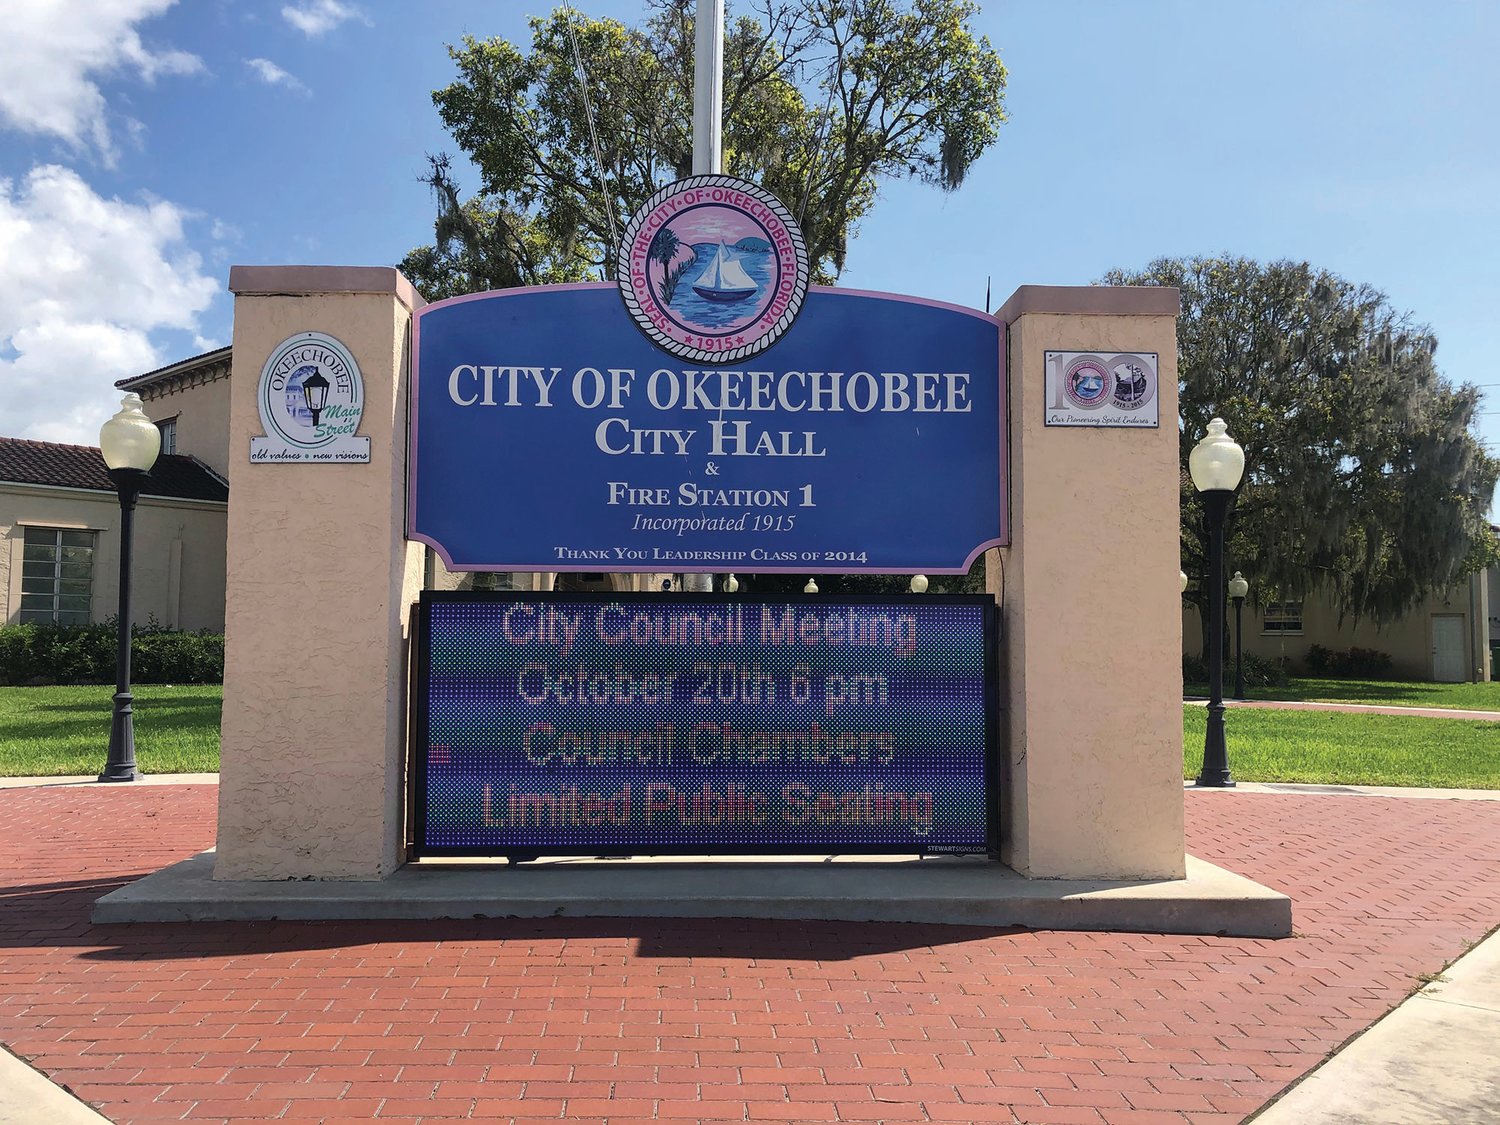 The Okeechobee City Council meets on the first and third Tuesday of each month at 6 p.m.